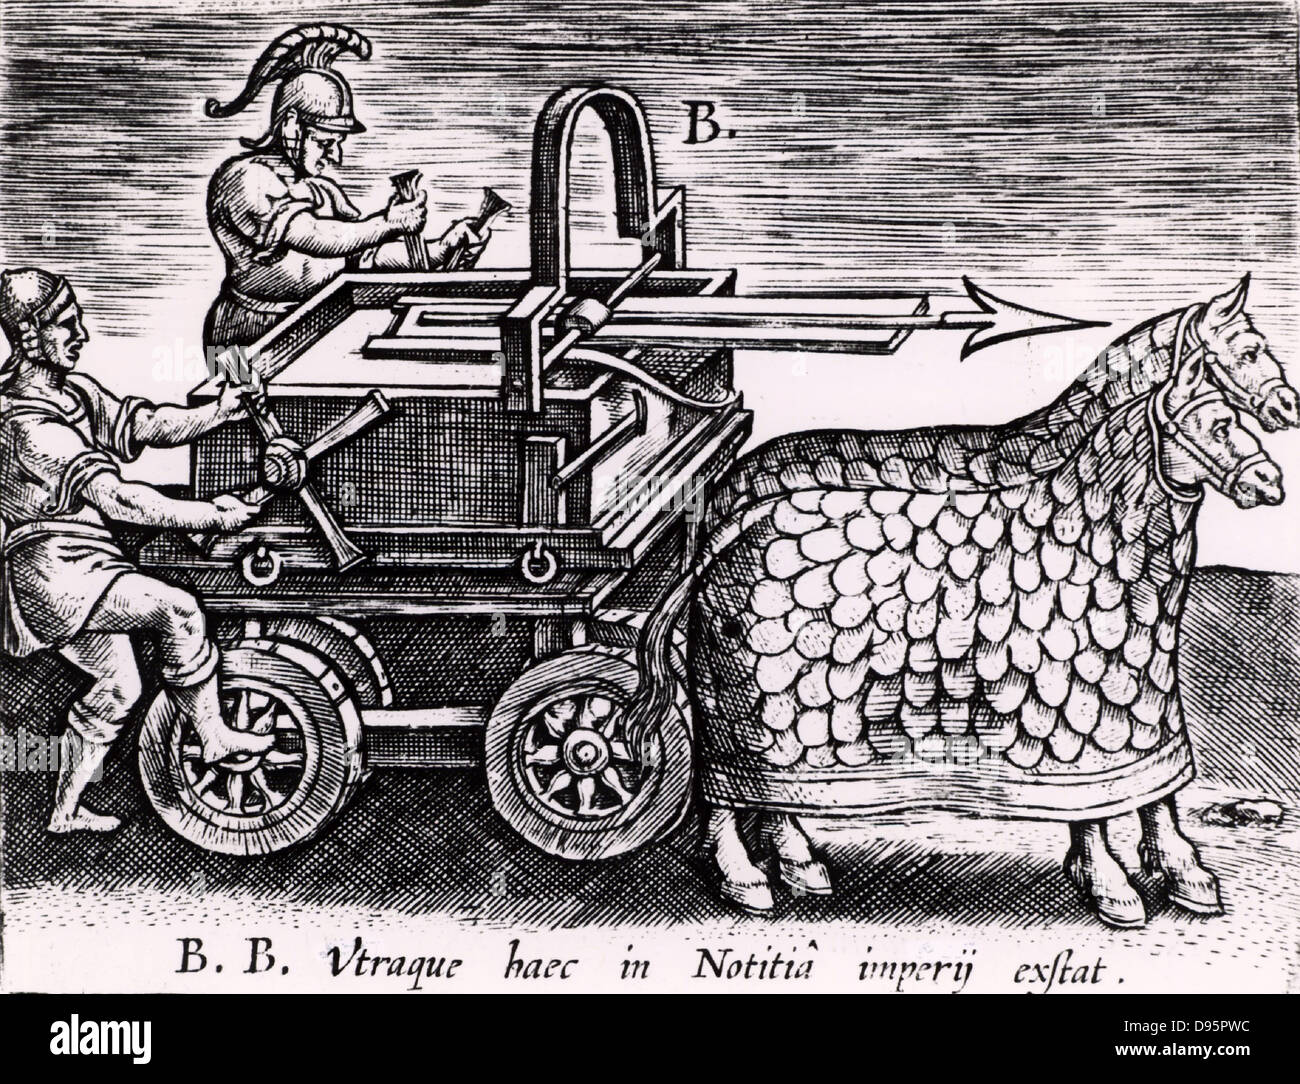 Roman machine for firing arrows mounted on a carriage drawn by two mailed horses. From 'Poliorceticon sive de machinis tormentis telis' by Justus Lipsius (Joost Lips) (Antwerp, 1605). Engraving. Stock Photo